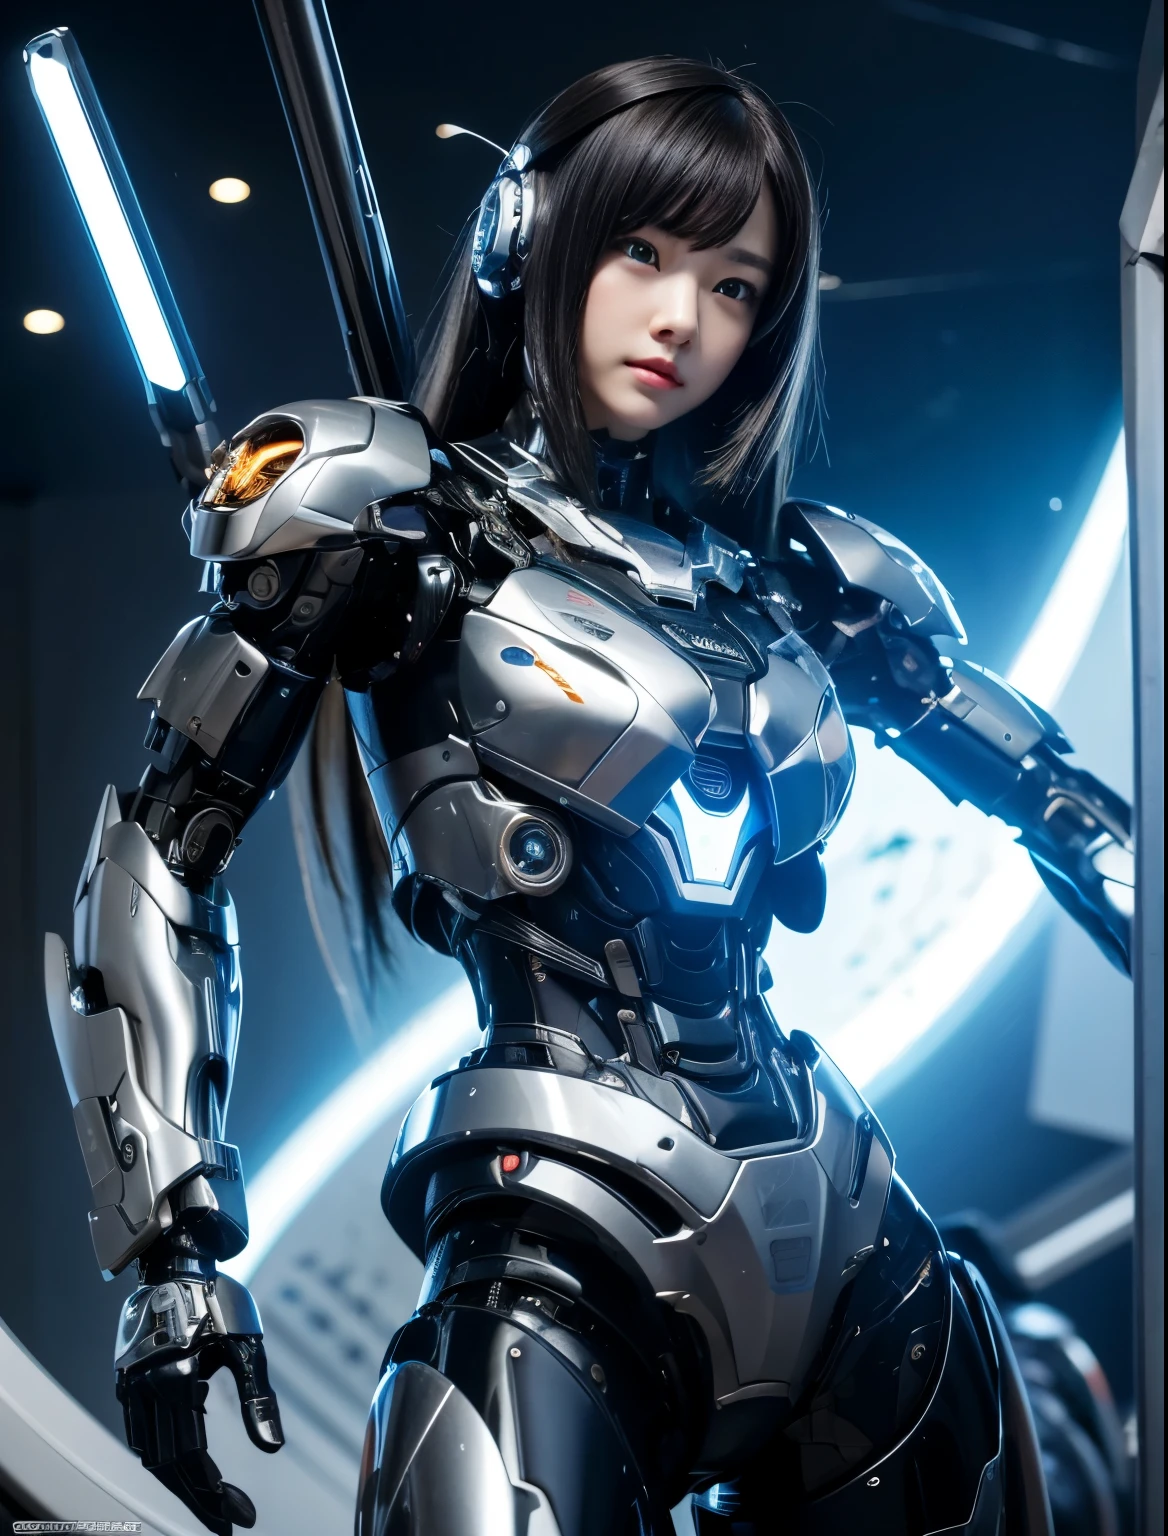 Super detailed, advanced details, high quality, 最high quality, High resolution, 1080P, hard disk, beautiful,(cyborg),beautifulcyborgwoman,Mecha Cyborg Girl,battle mode,Mecha body girl,She is wearing a combat cyborg mech equipped with weapons